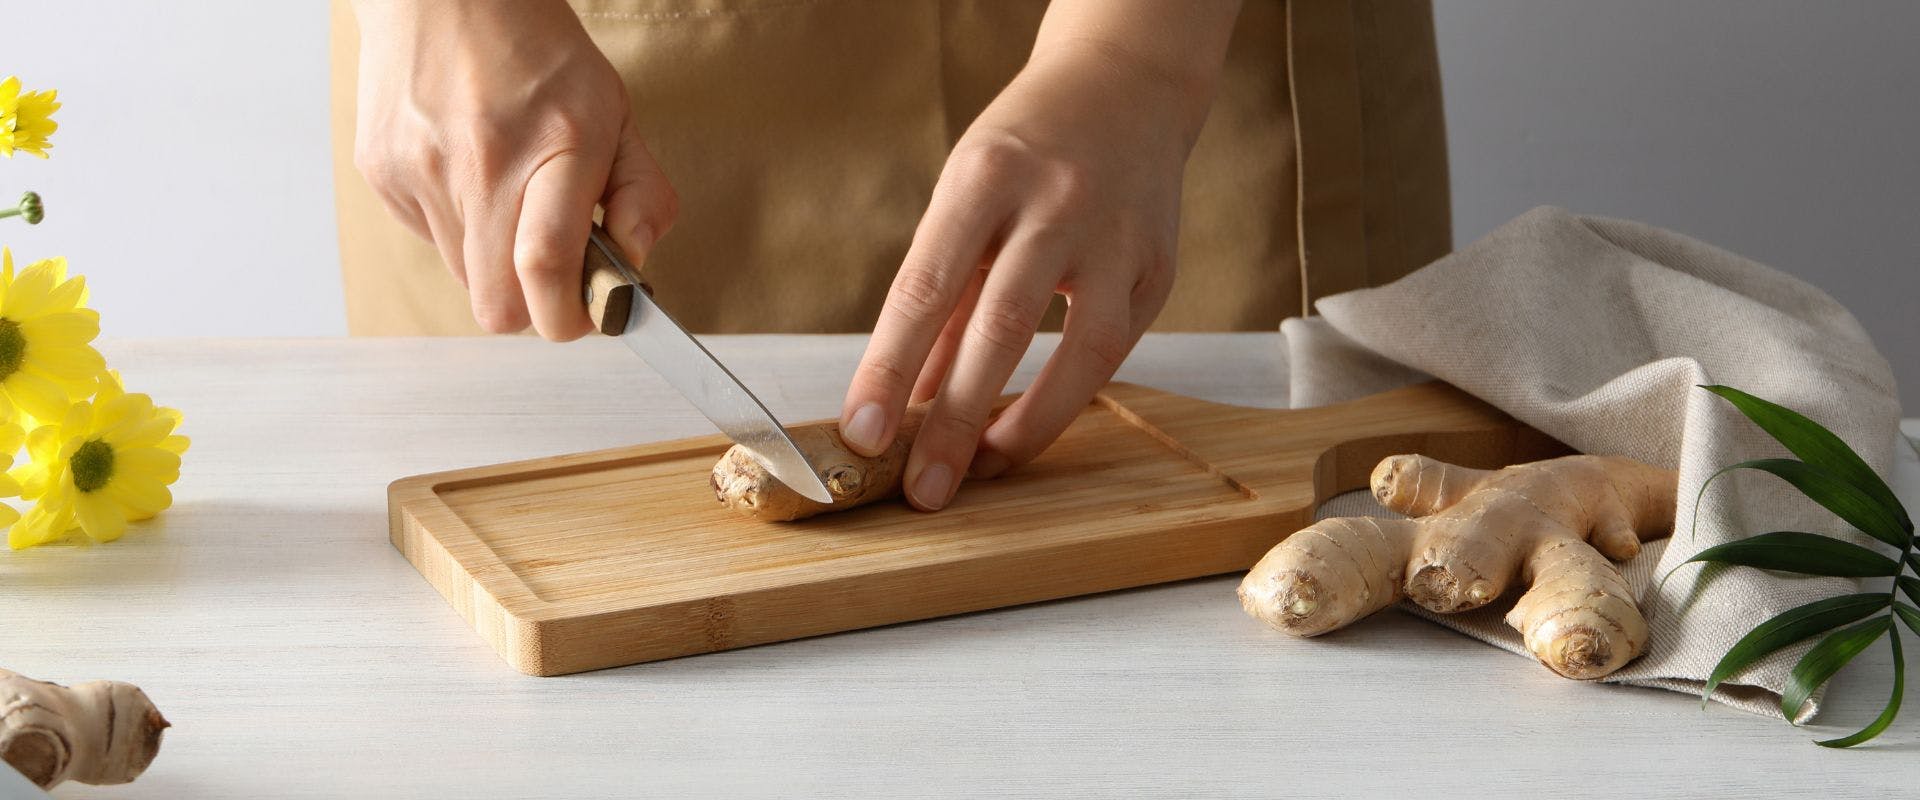 Ginger being sliced on a wooden board